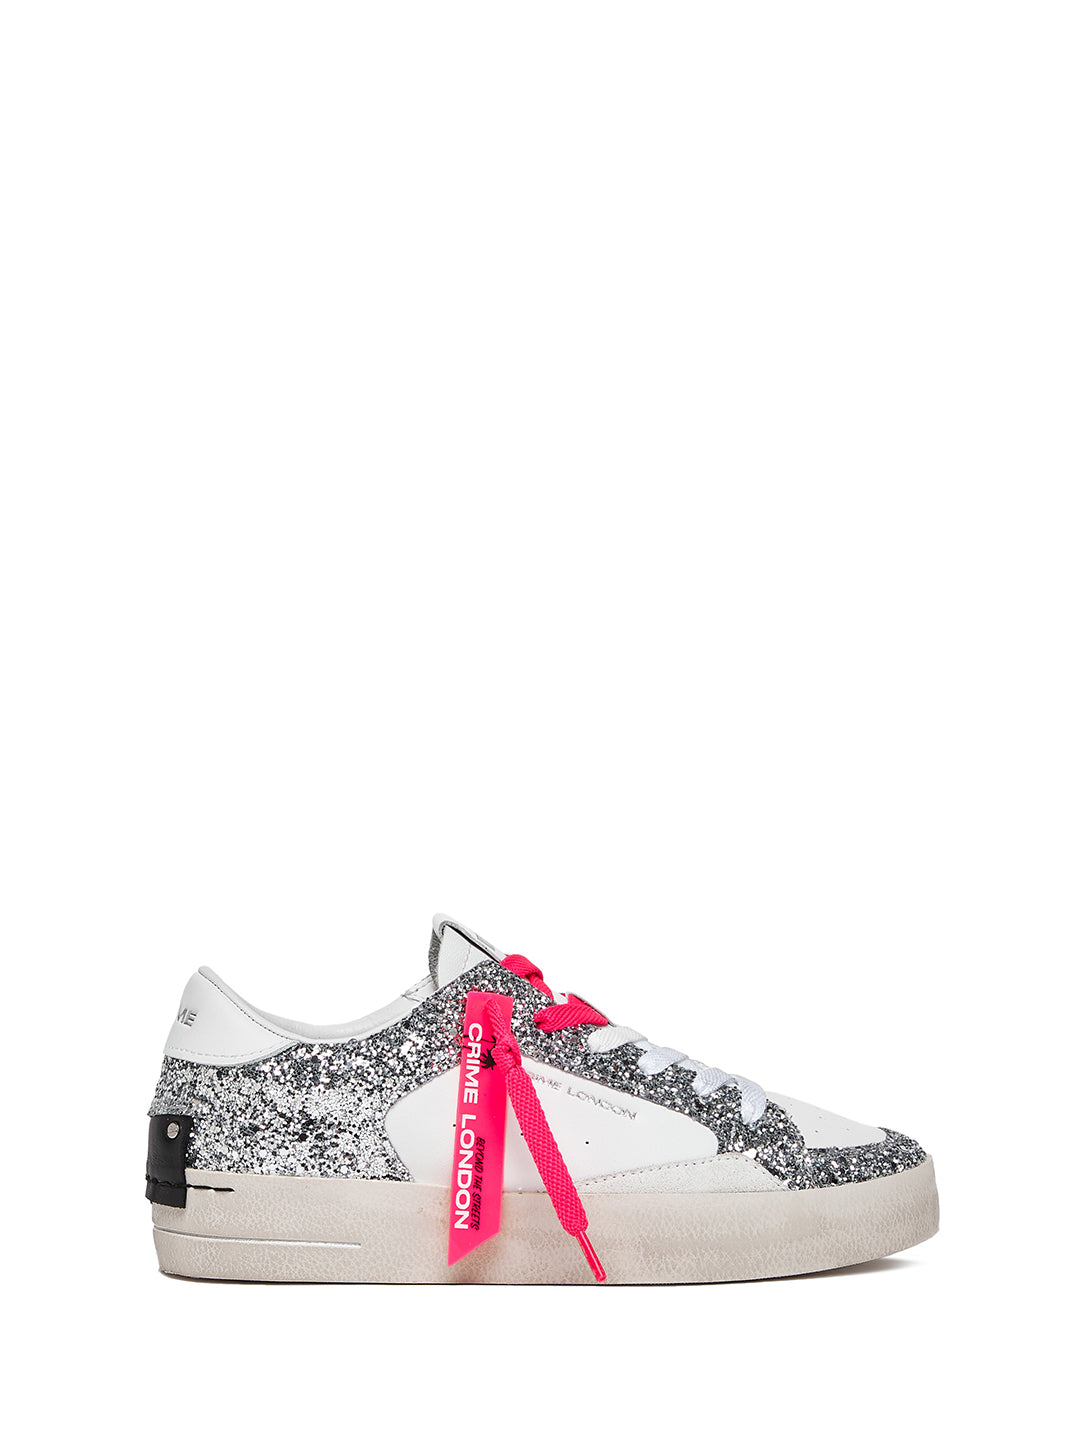 Crime Sk8 Deluxe Party Girl sneakers bianco con glitter argento